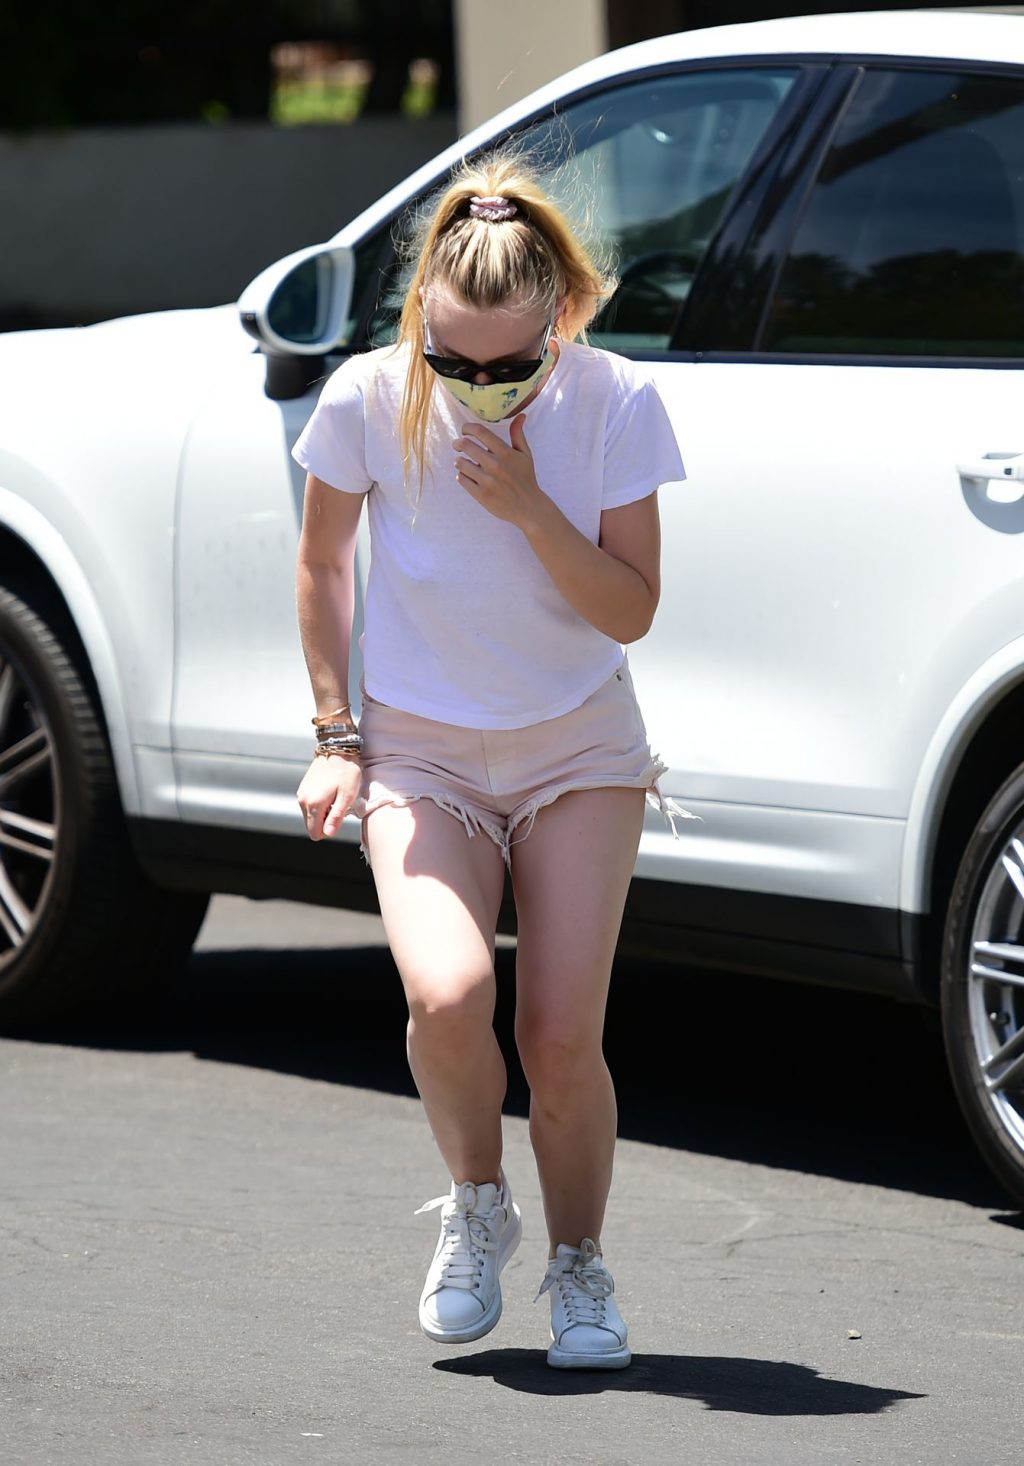 Dakota Fanning is Pictured Out and About in LA (25 Photos)